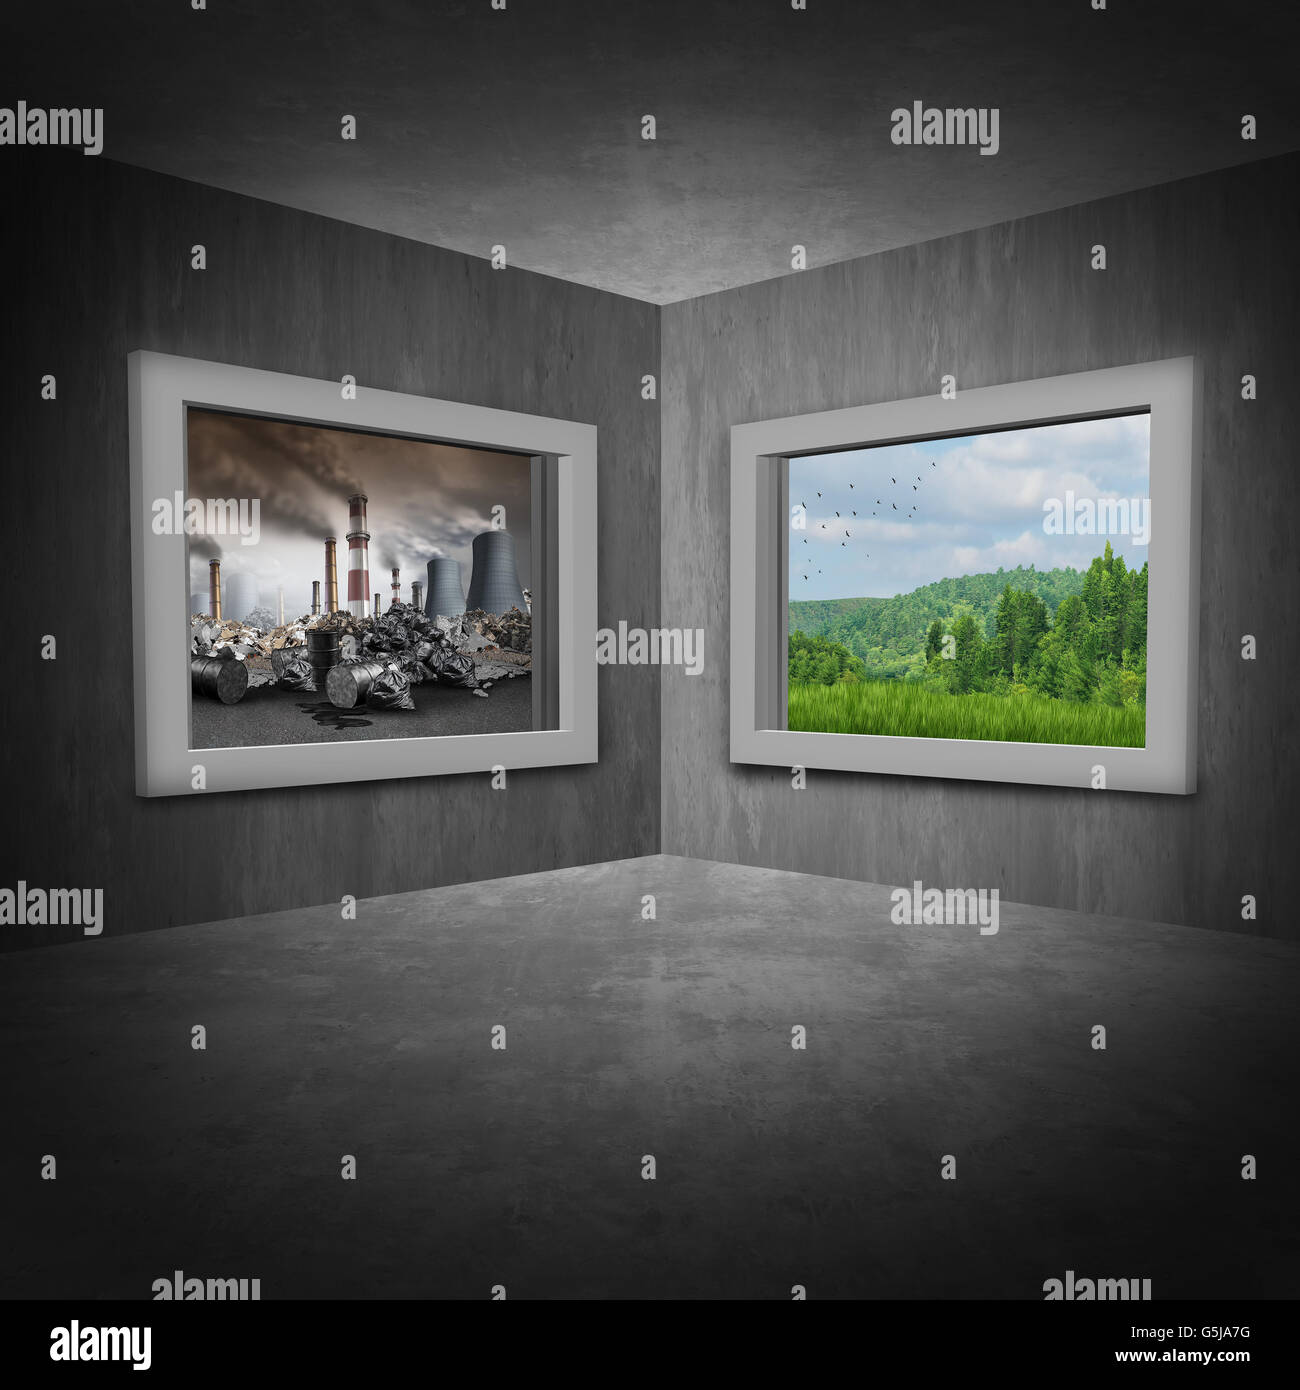 Environmental change concept as a room with two windows showing a polluted toxic environment contrasted by another window with green trees and clean air as a climate and ozone depletion symbol with 3D illustration elements. Stock Photo